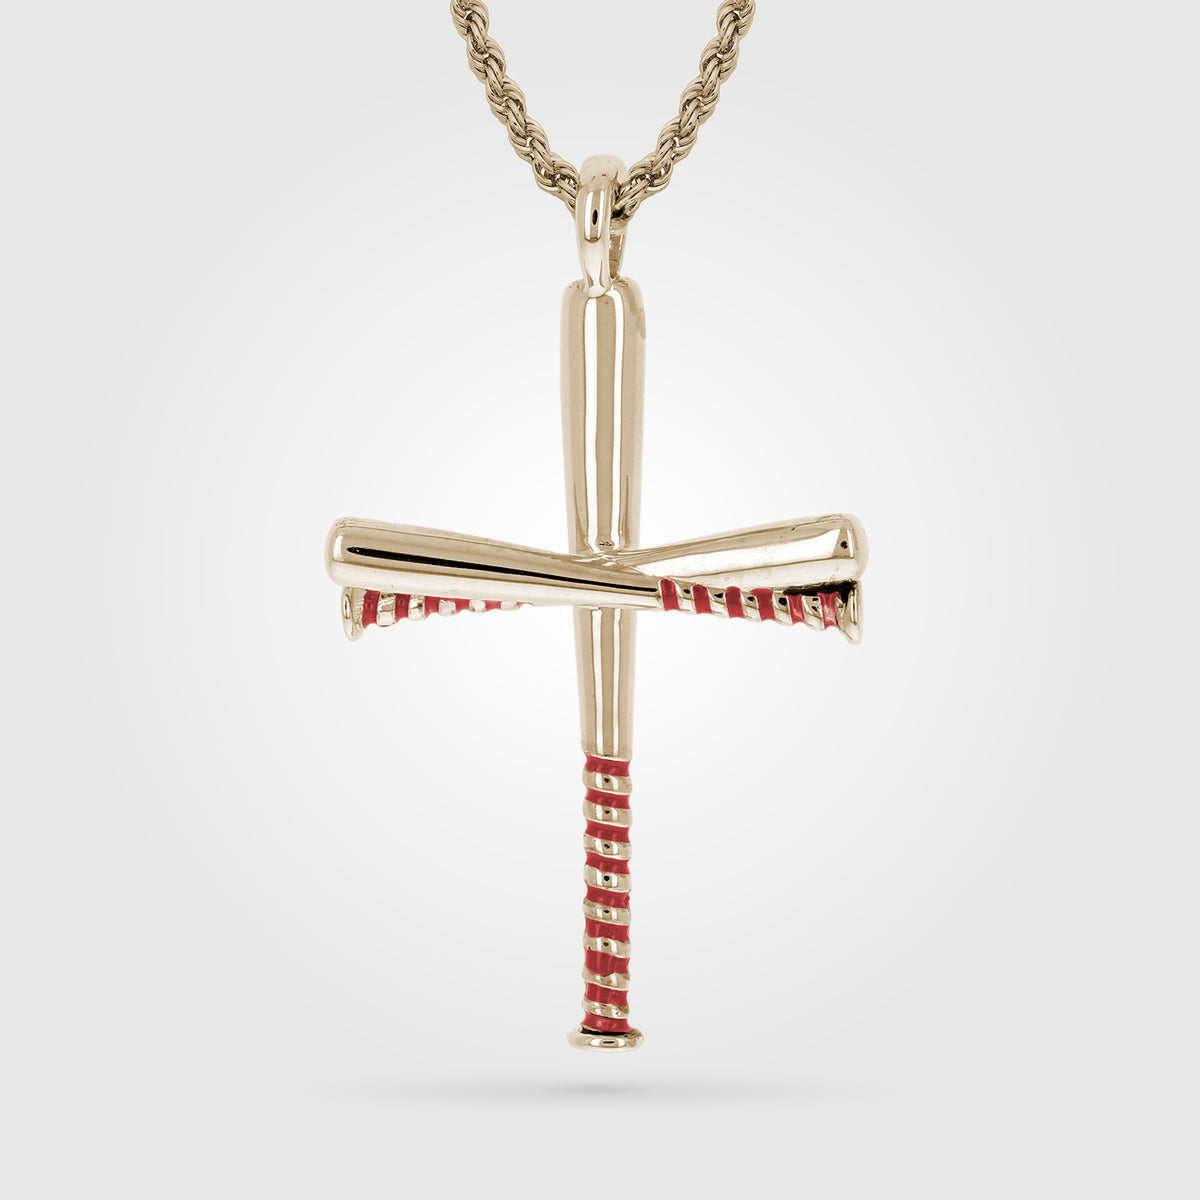 Baseball Cross Necklace for Boys - Stainless Steel Cross Necklace for  American Men Women Girls Gold Chain | Amazon.com